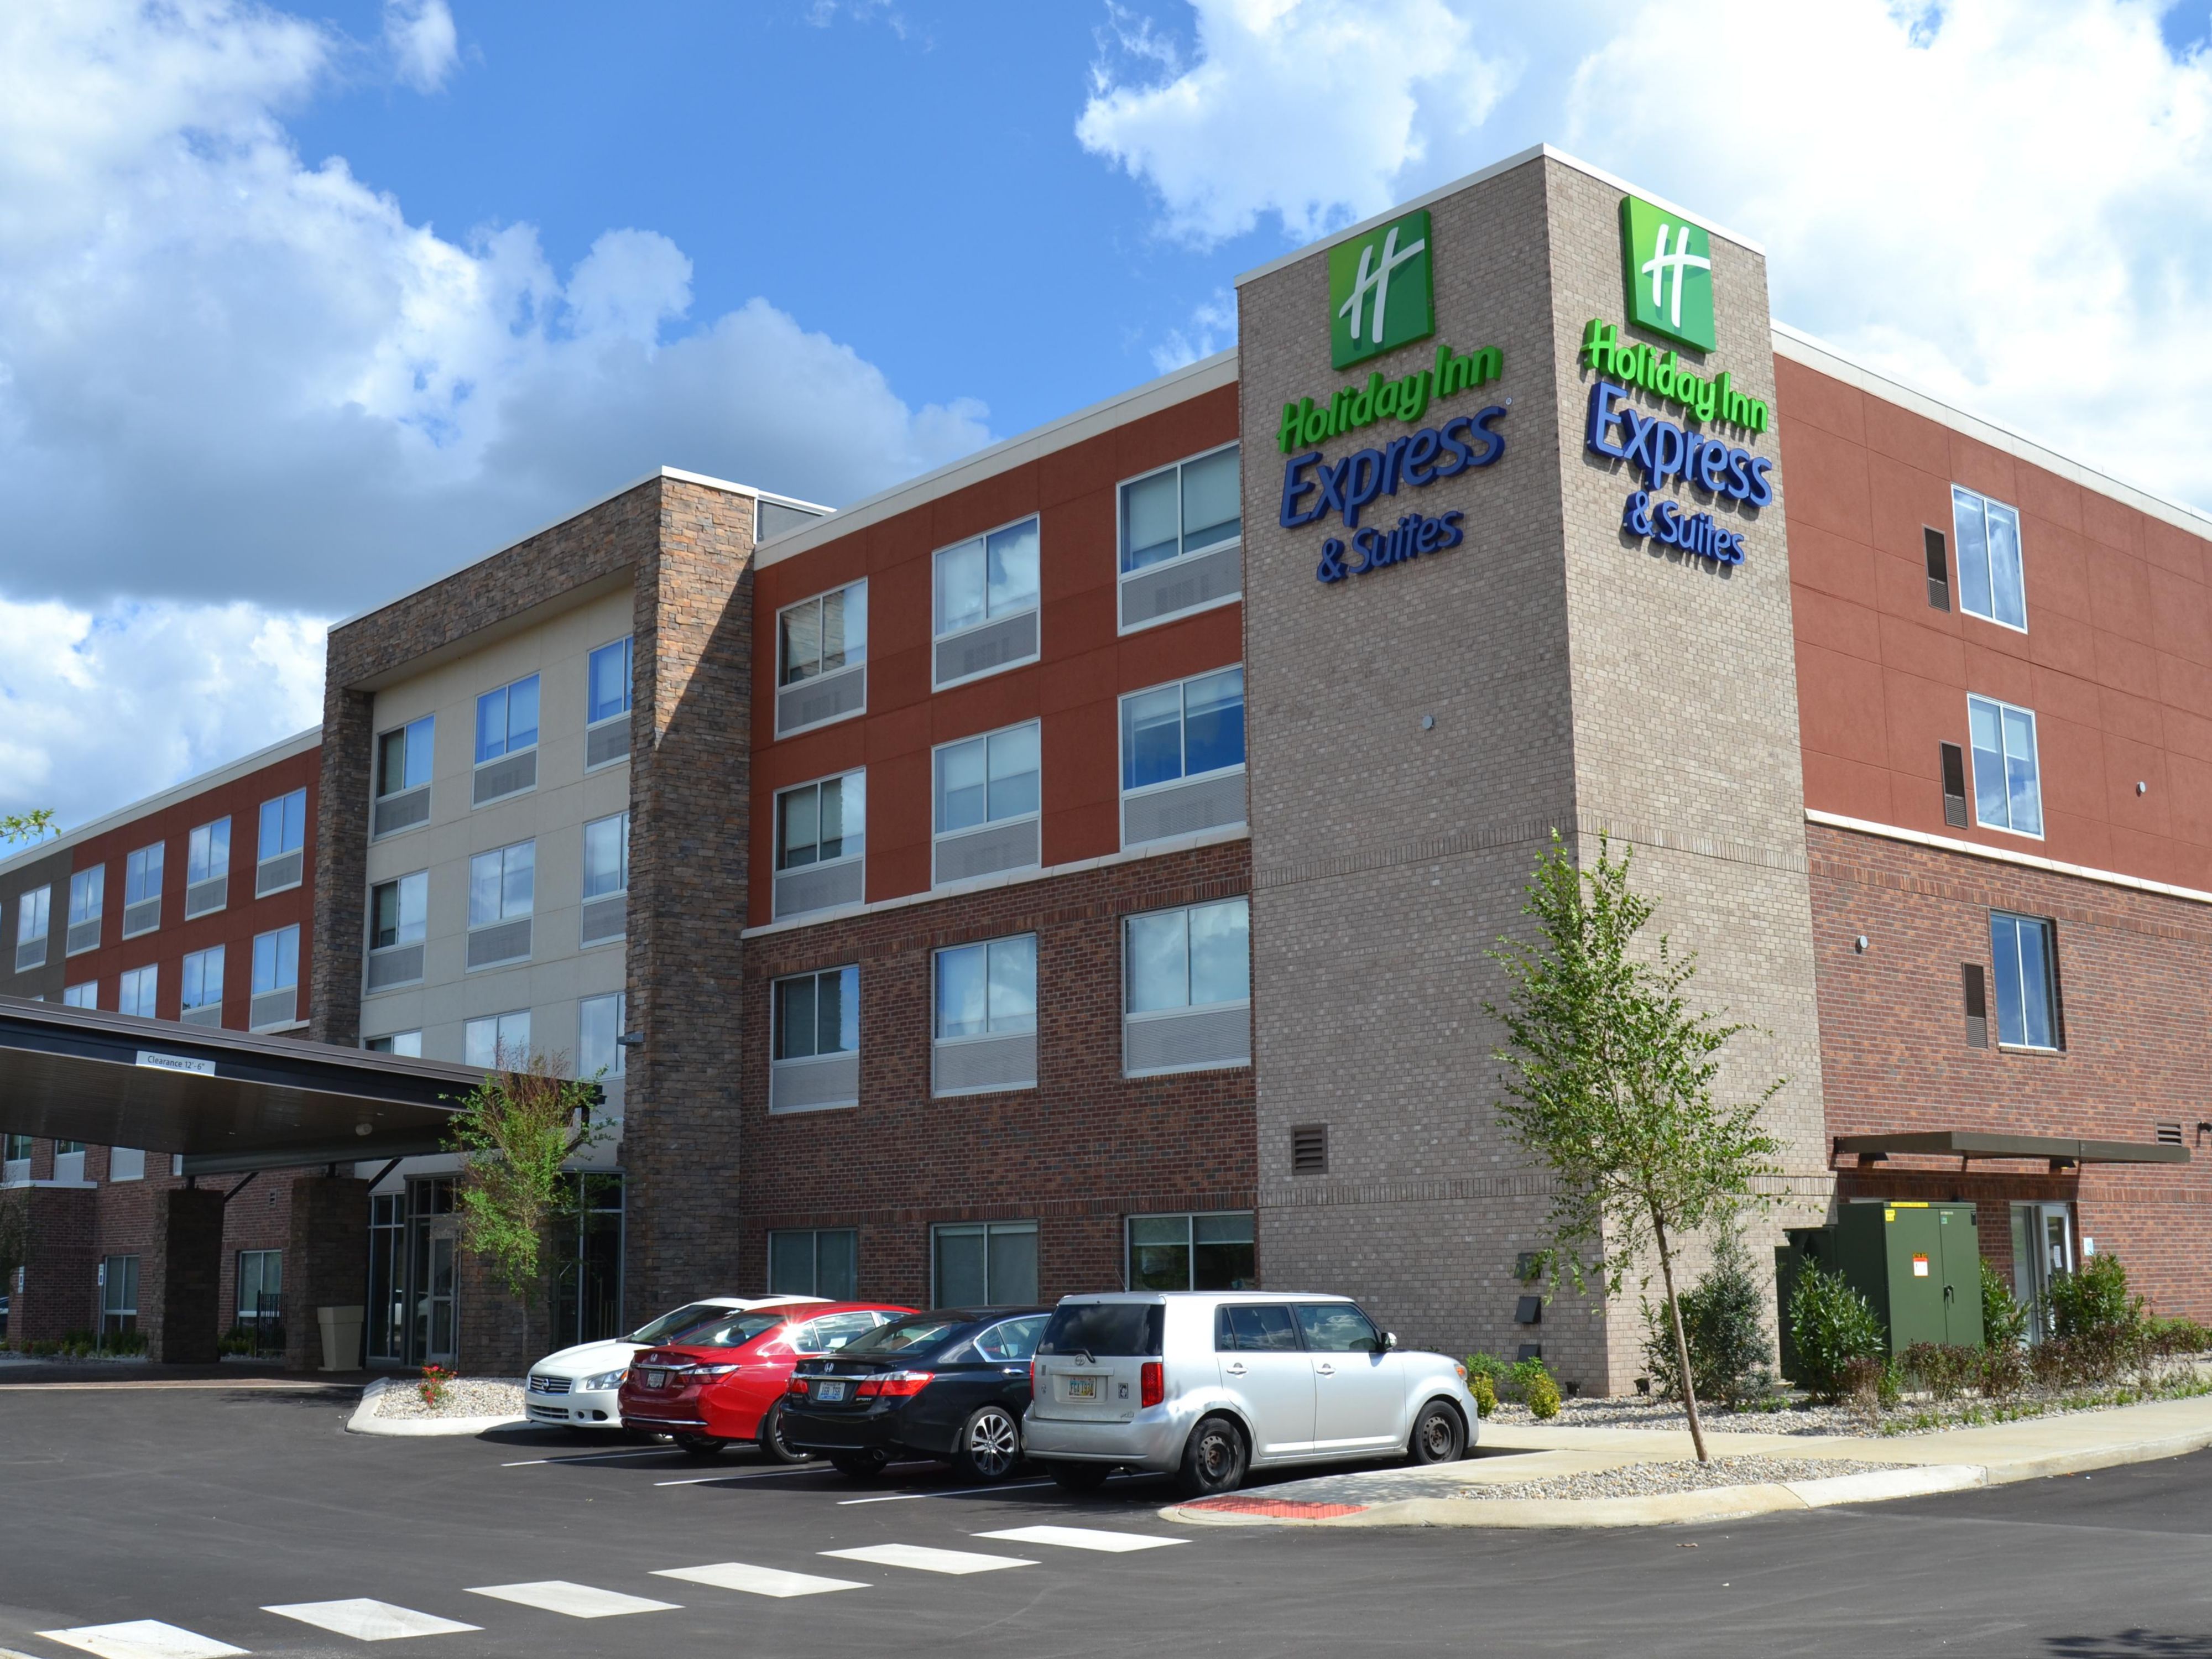 Holiday Inn Express And Suites Goodlettsville 5679193016 4x3